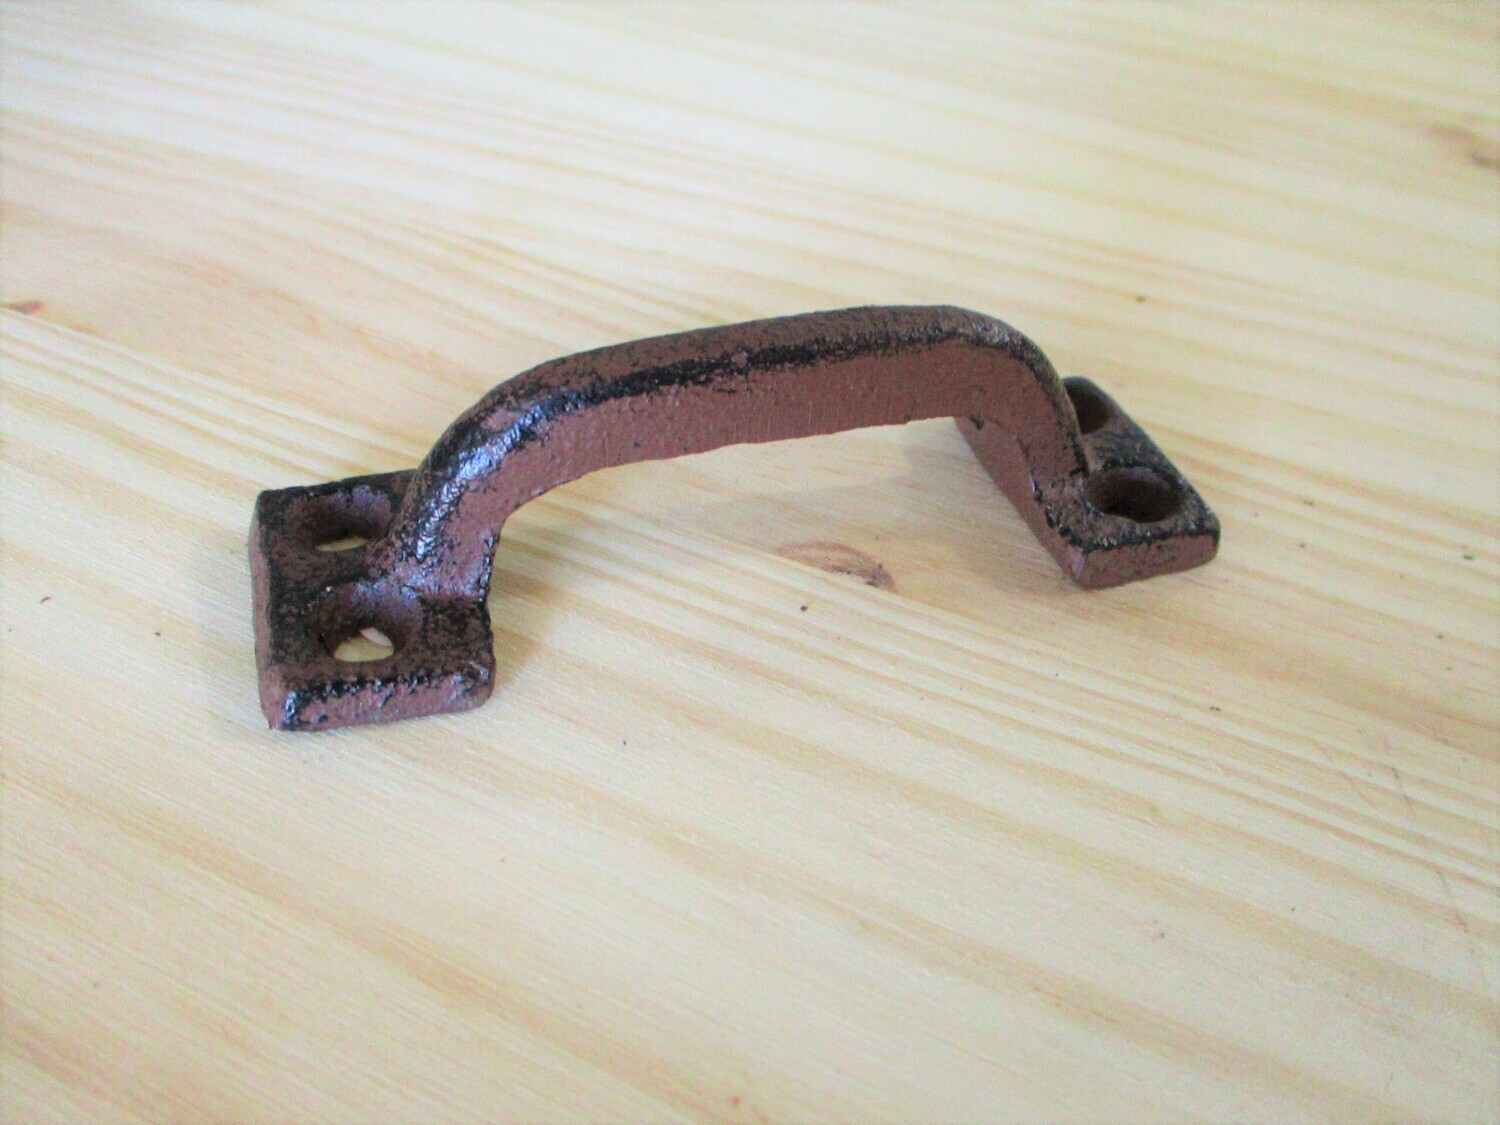 SMALL RUSTIC CAST IRON HANDLE / DRAWER PULL